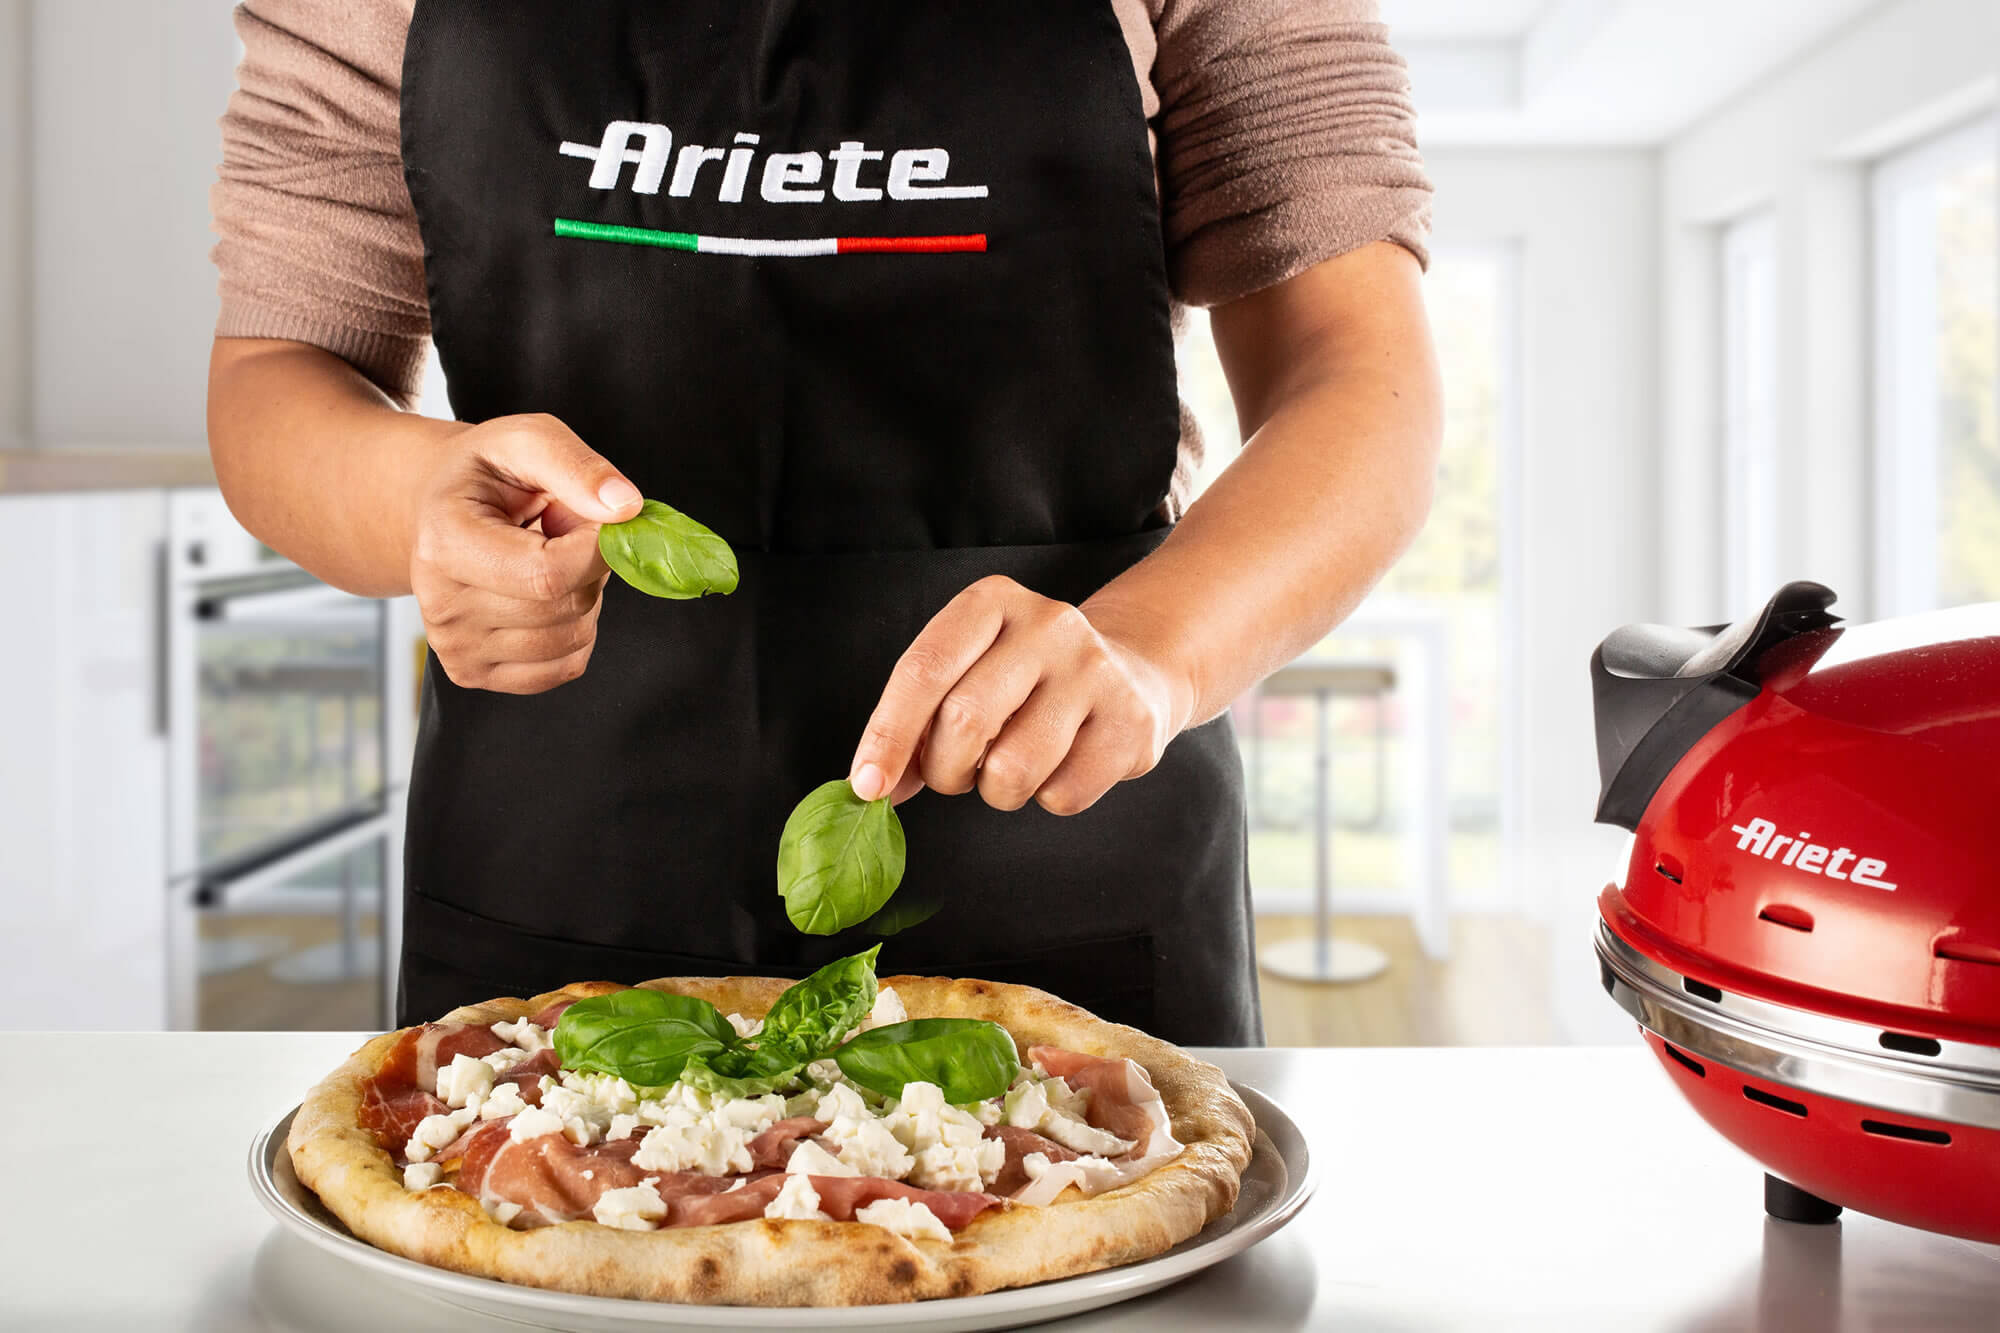 Red oven homemade oven | Ariete | for in pizza 4 minutes Pizza